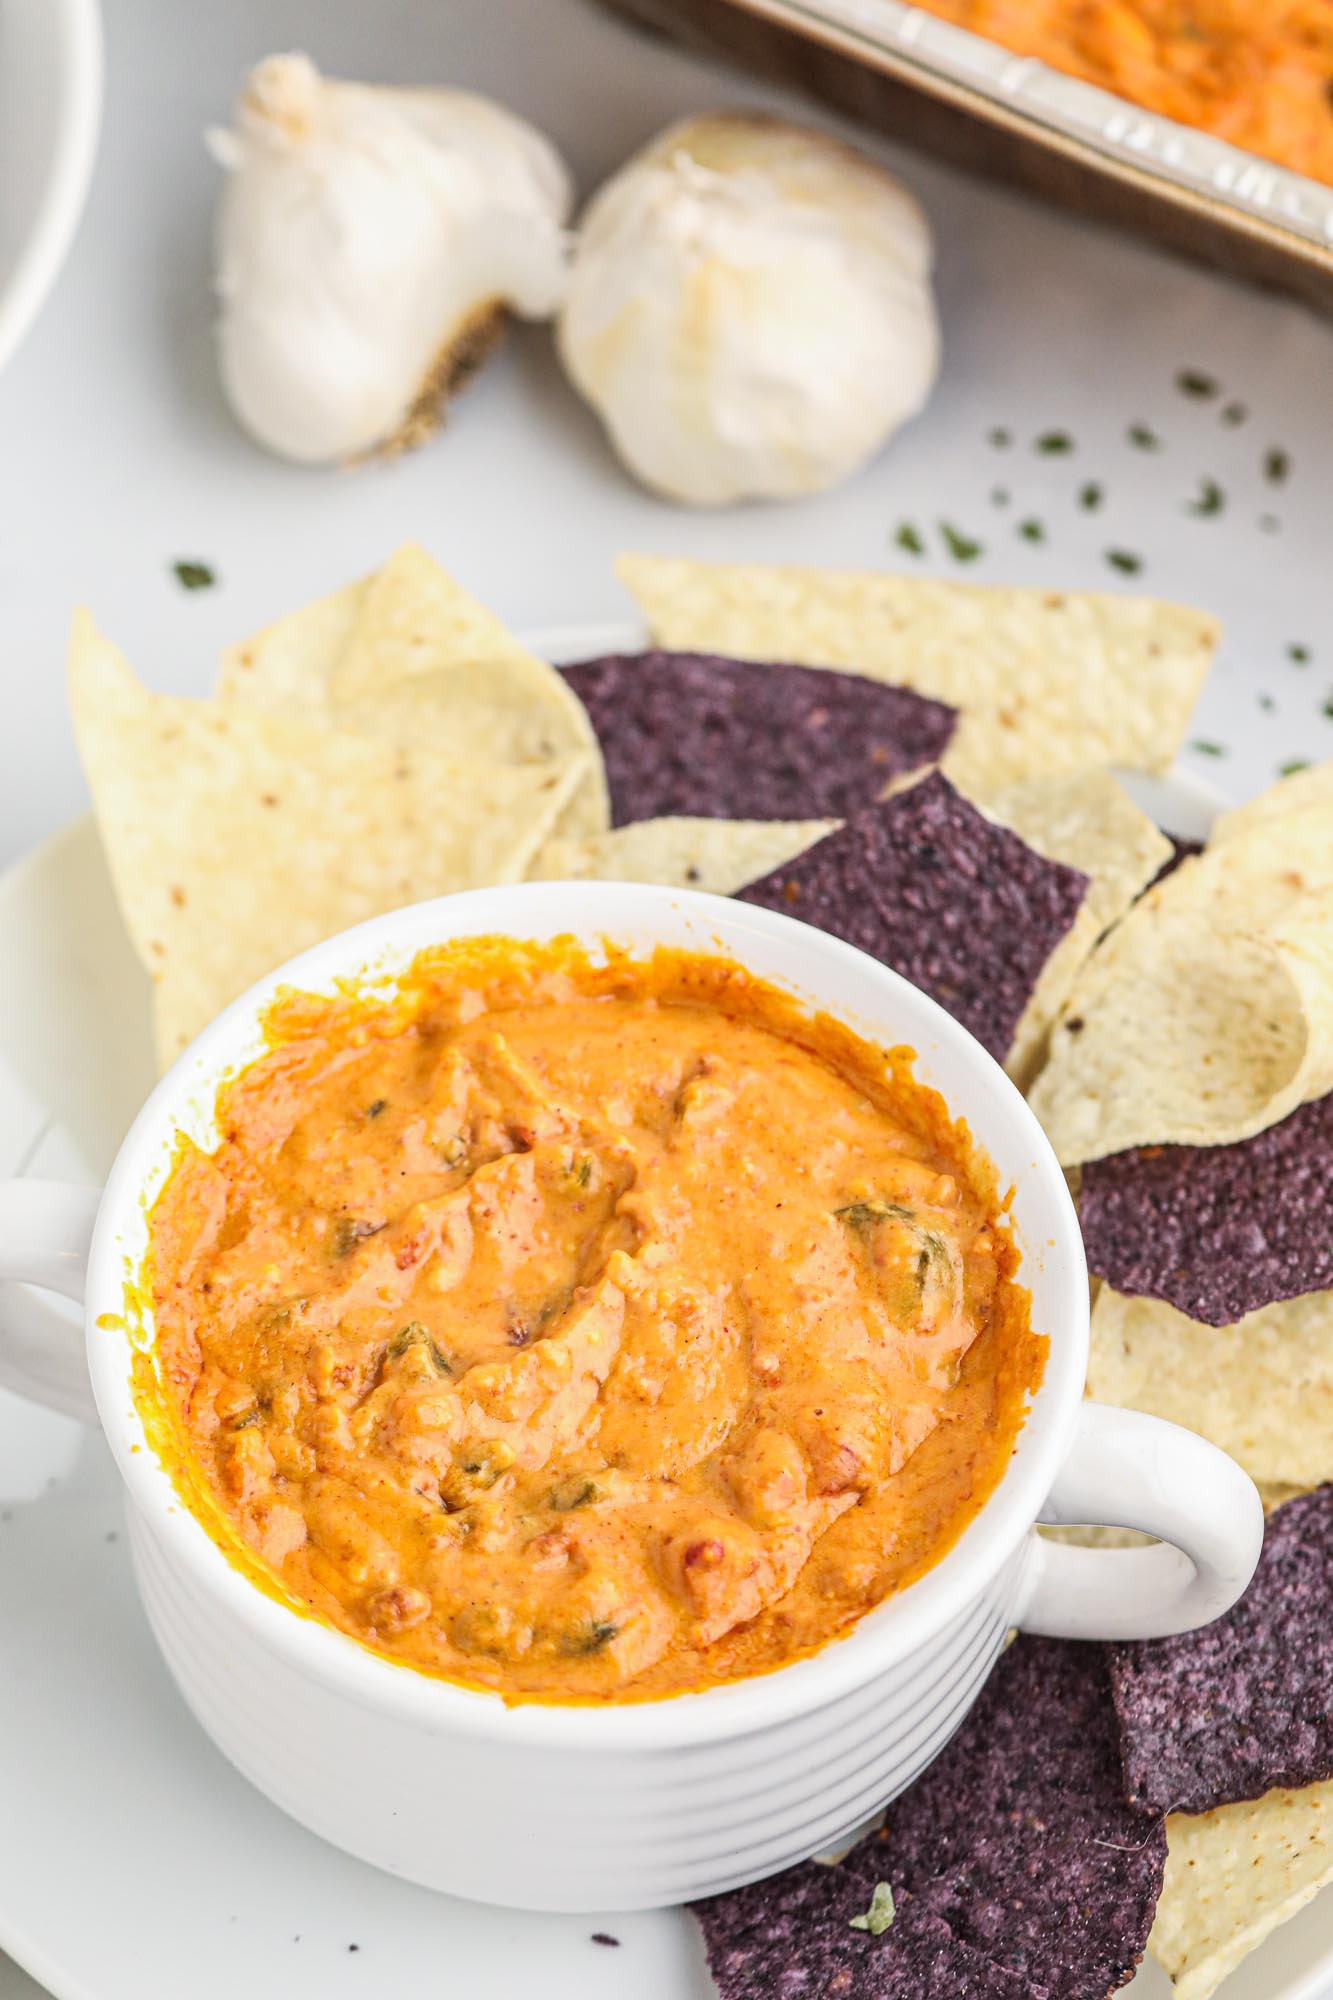 Smoked queso served in a bowl with tortilla chips on the side